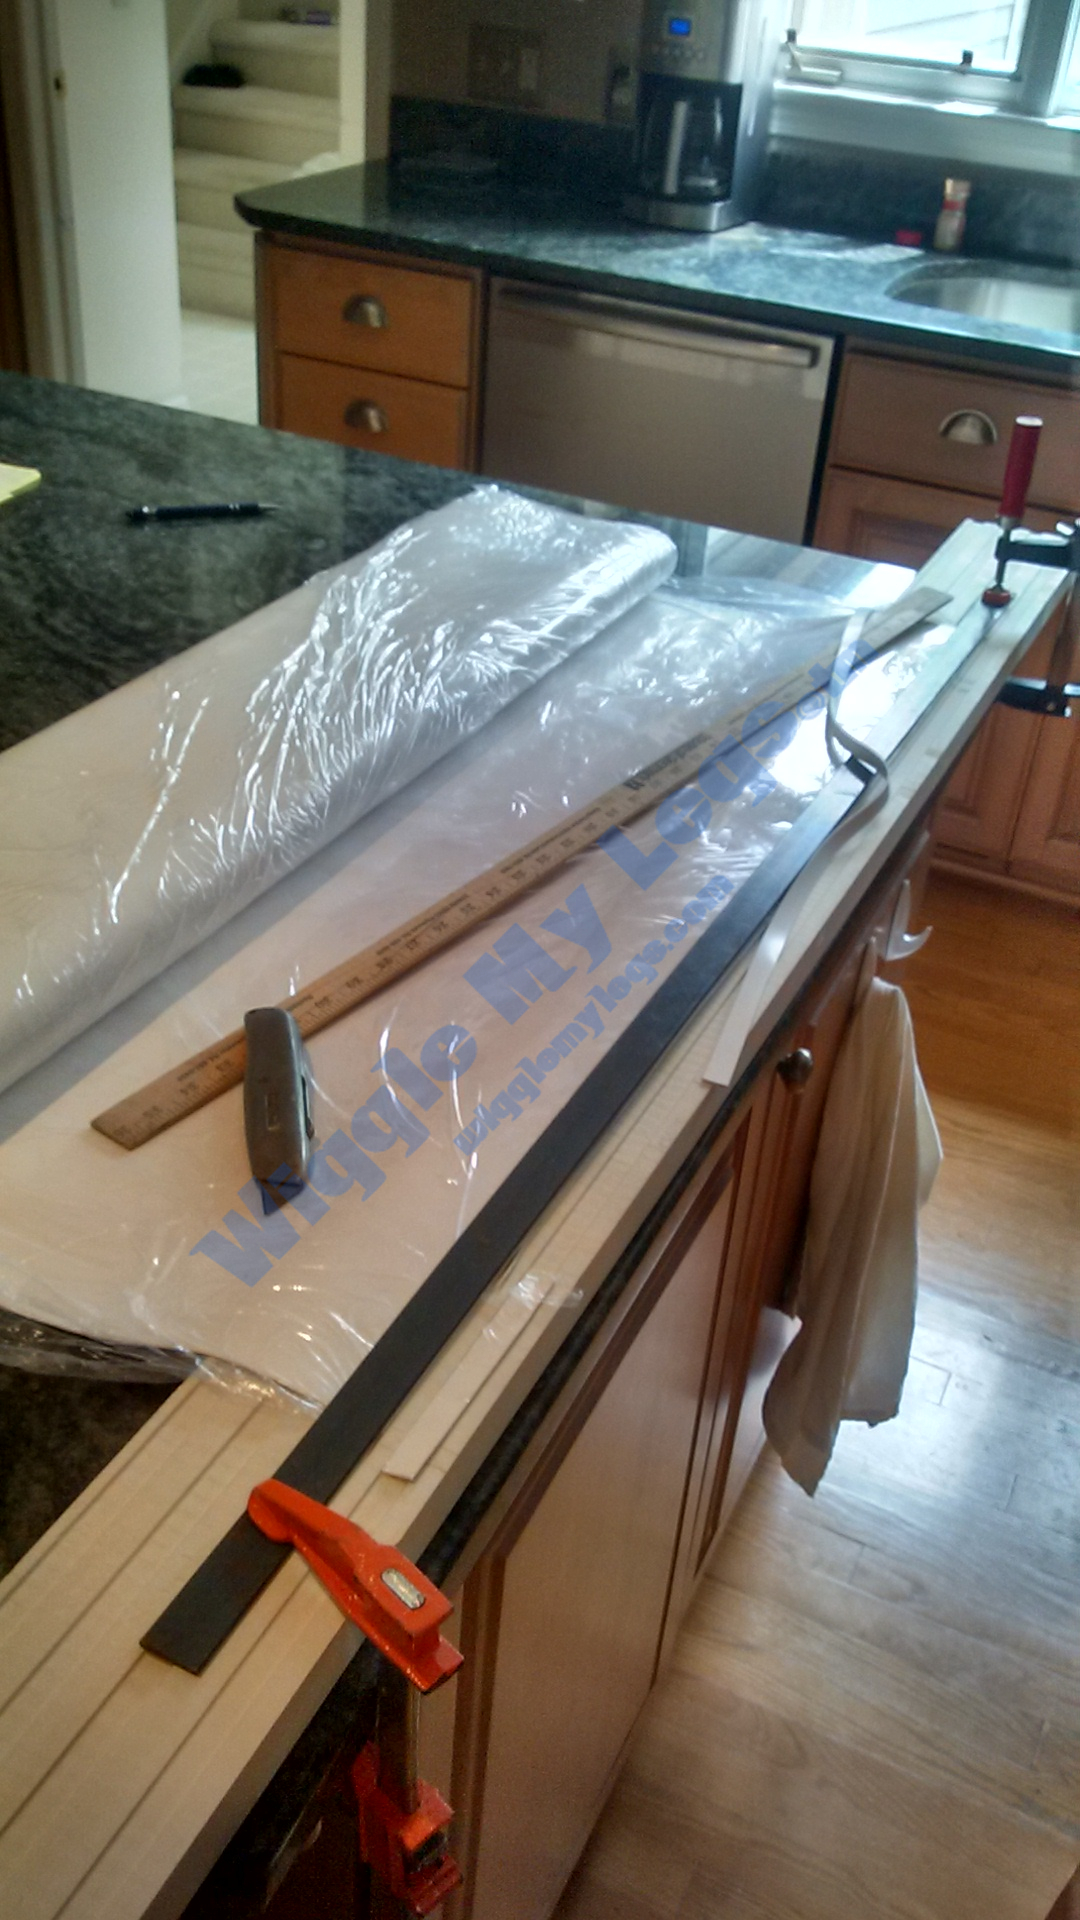 View of the dark metal straight edge clamped onto rubber sheet to allow utility knife to cut straight strips for new stove seals under spill trays.